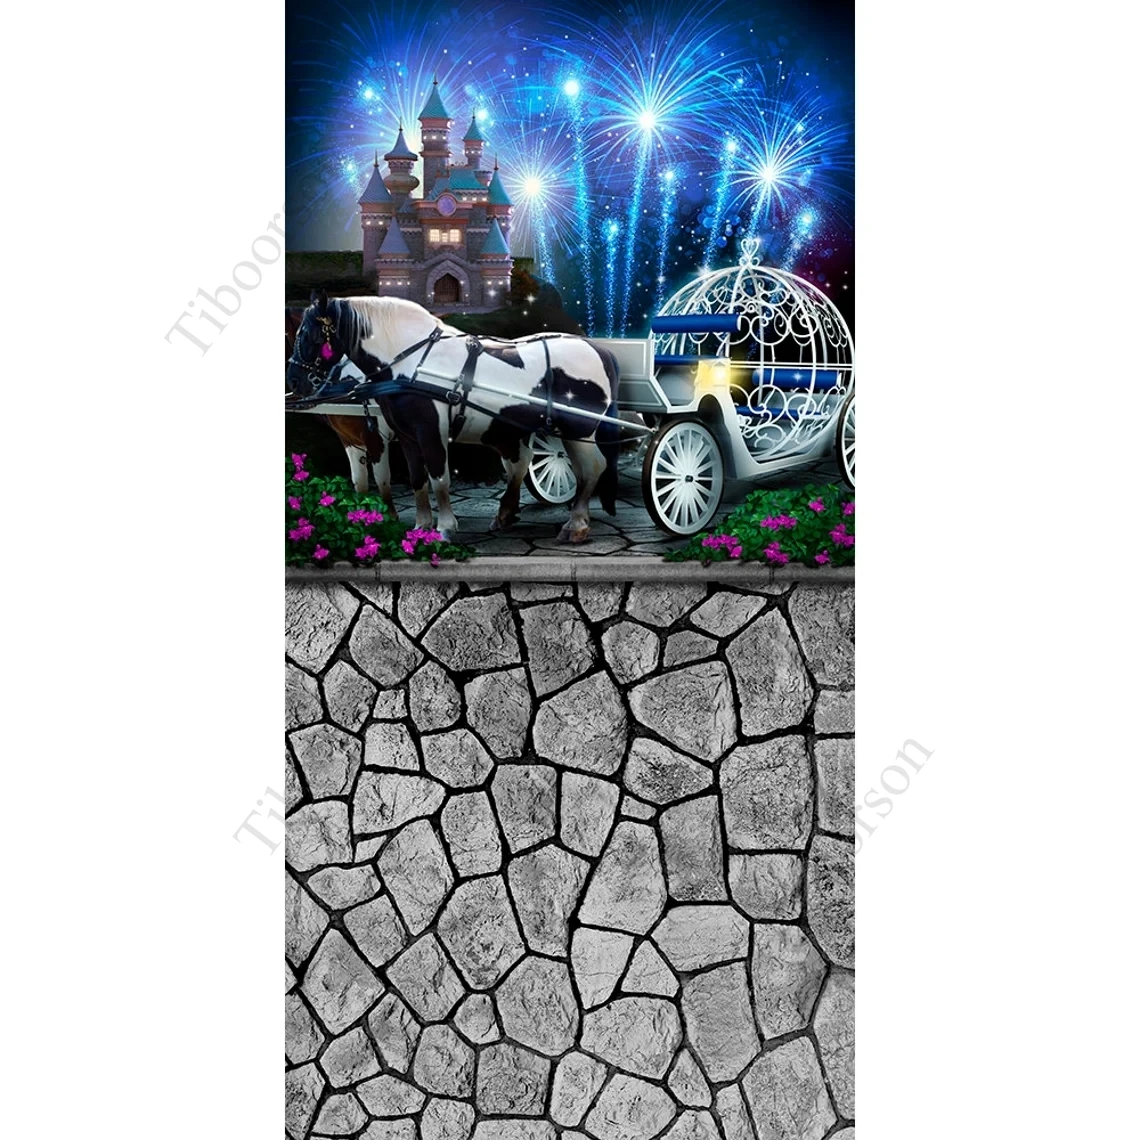 Fairy Tale Castle Princess Backdrop for Photography Props Pumpkin Carriage Cinderella Firework New Year Background Wedding Decor enlarge